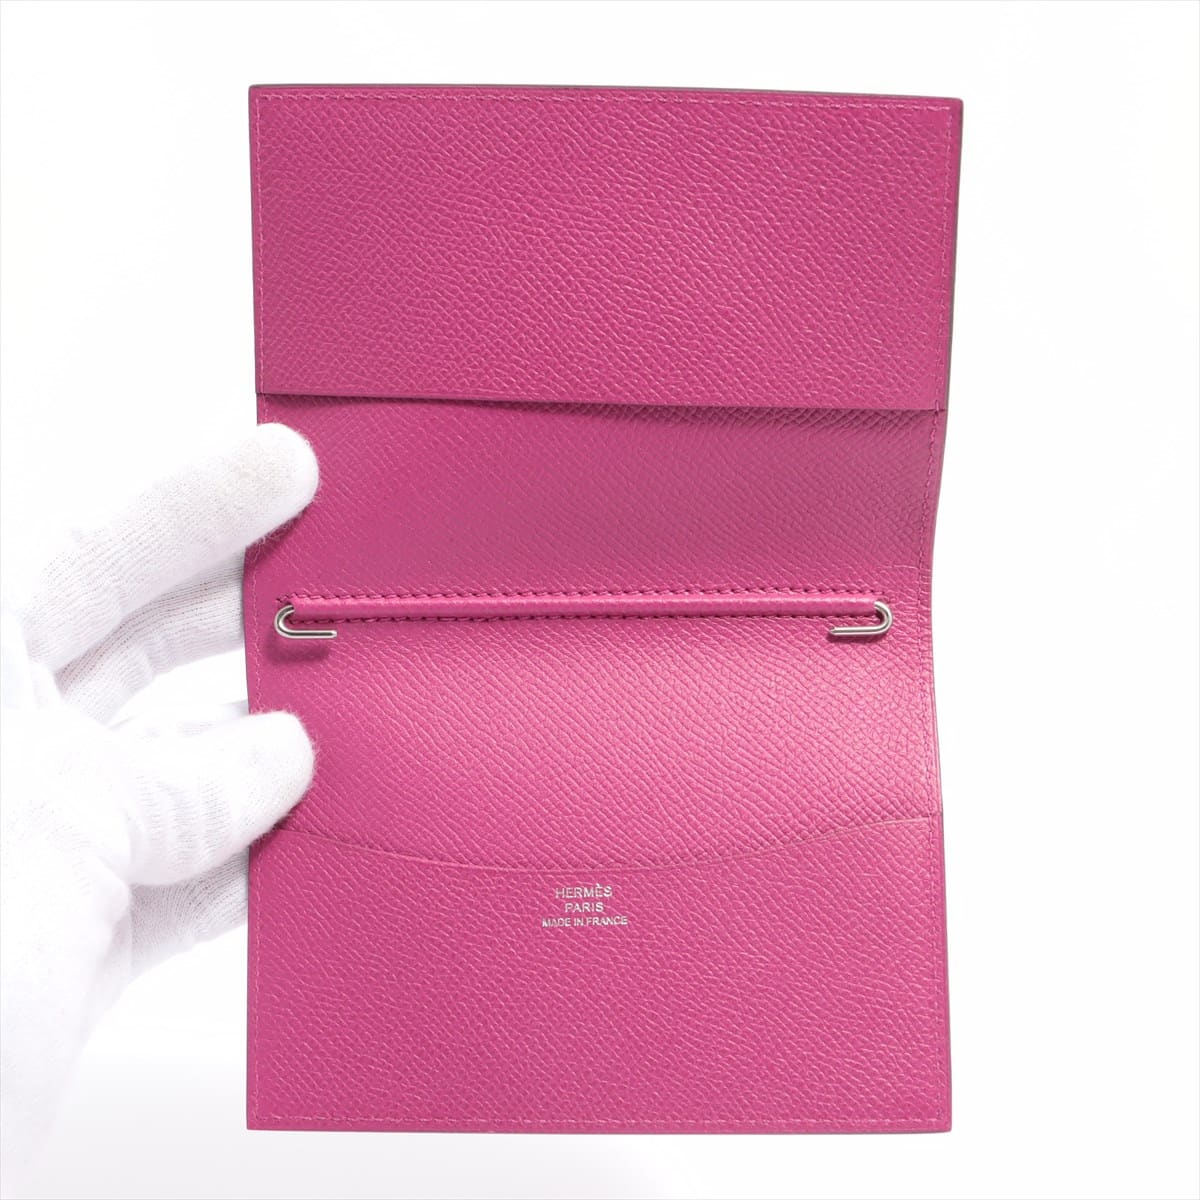 Hermès Agenda Veau Epsom Notebook cover Pink Silver Metal fittings A:2017